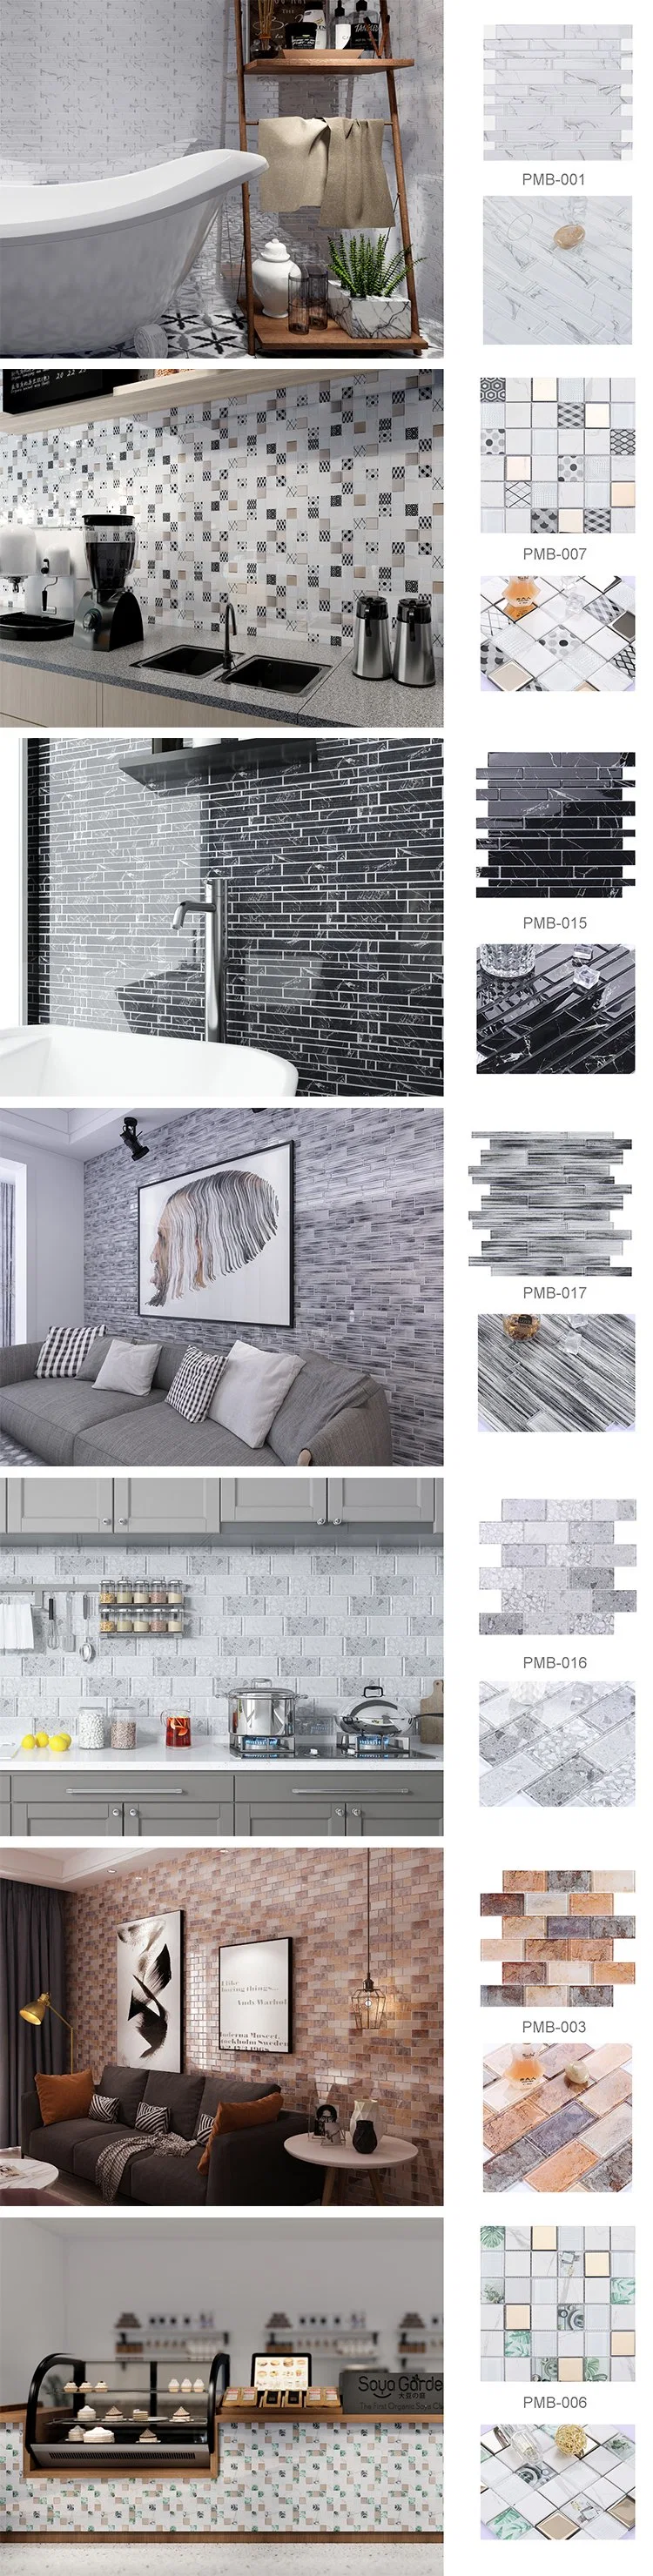 65 Square Meter in Stock Building Wall Interior Decoration Hexagon Black Cracked Grey Glass Mosaic Tile